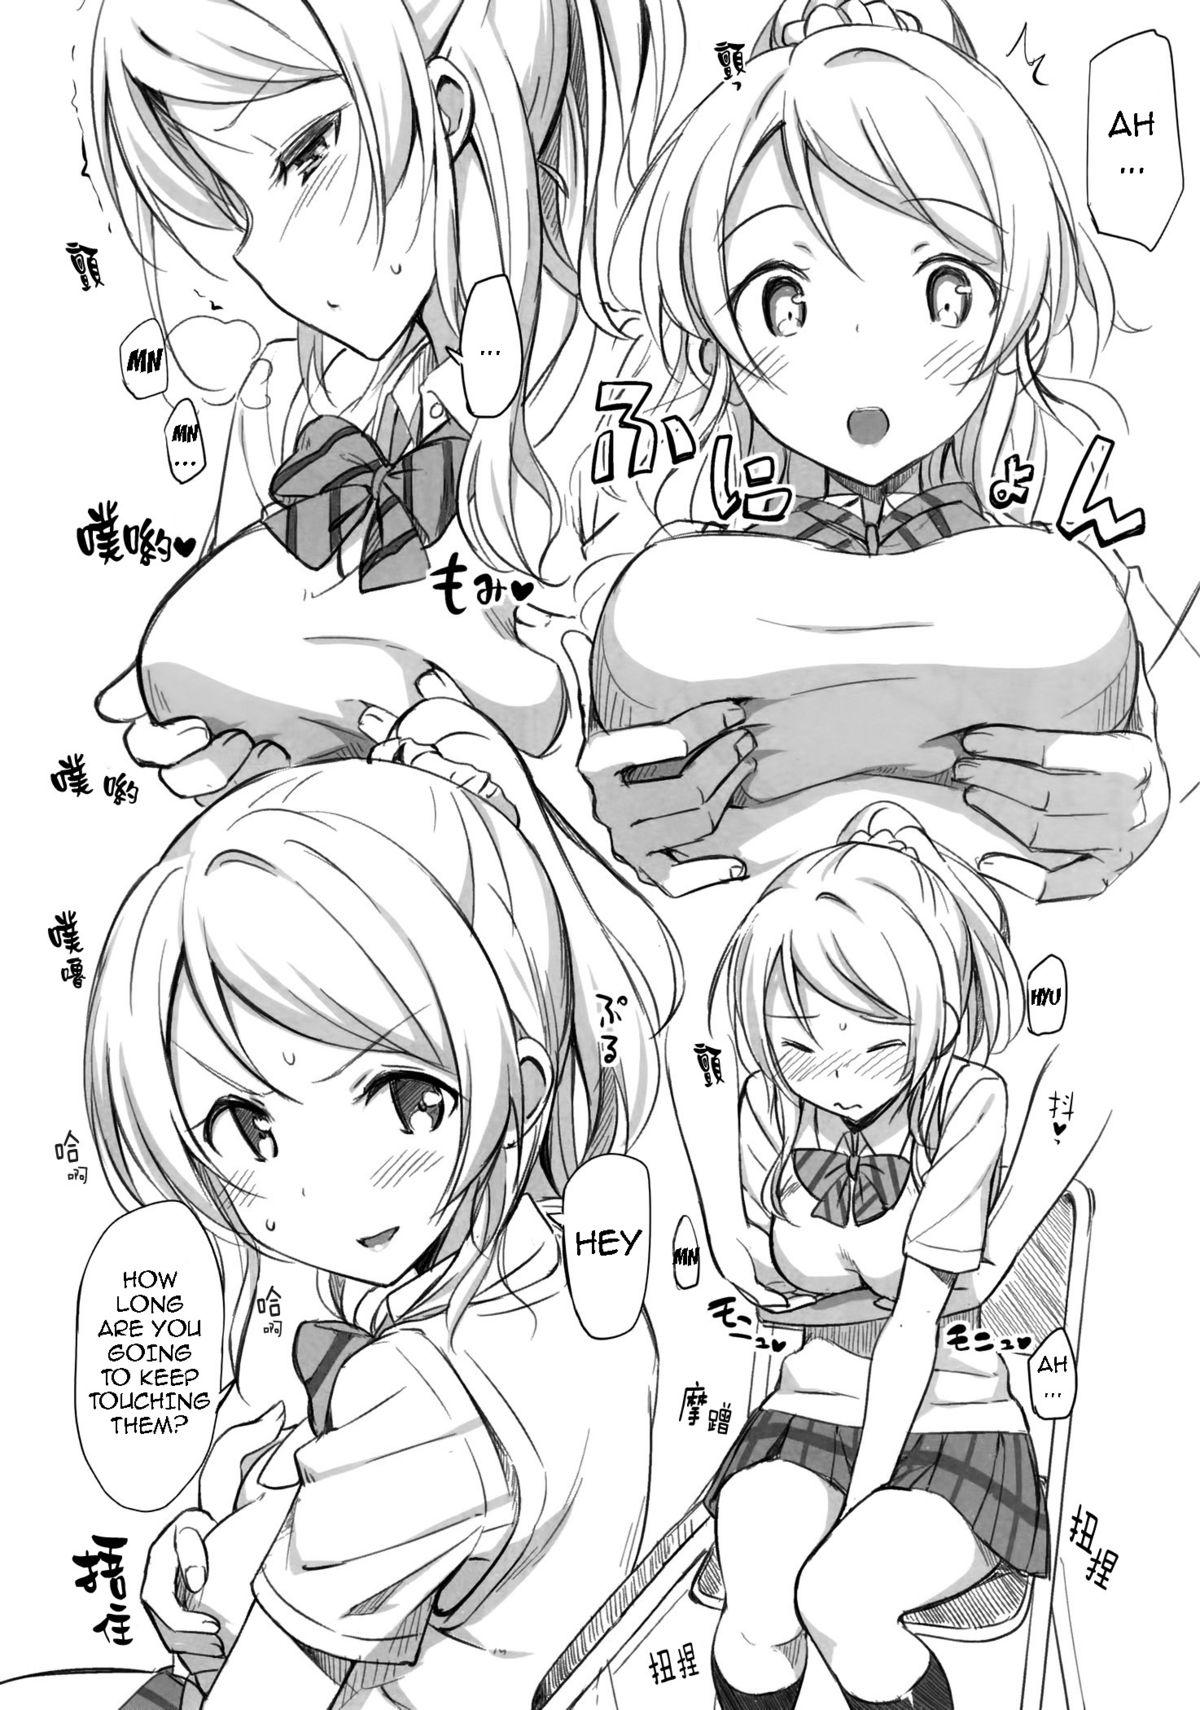 Soft School ldol Off-shot - Love live Reality - Page 5